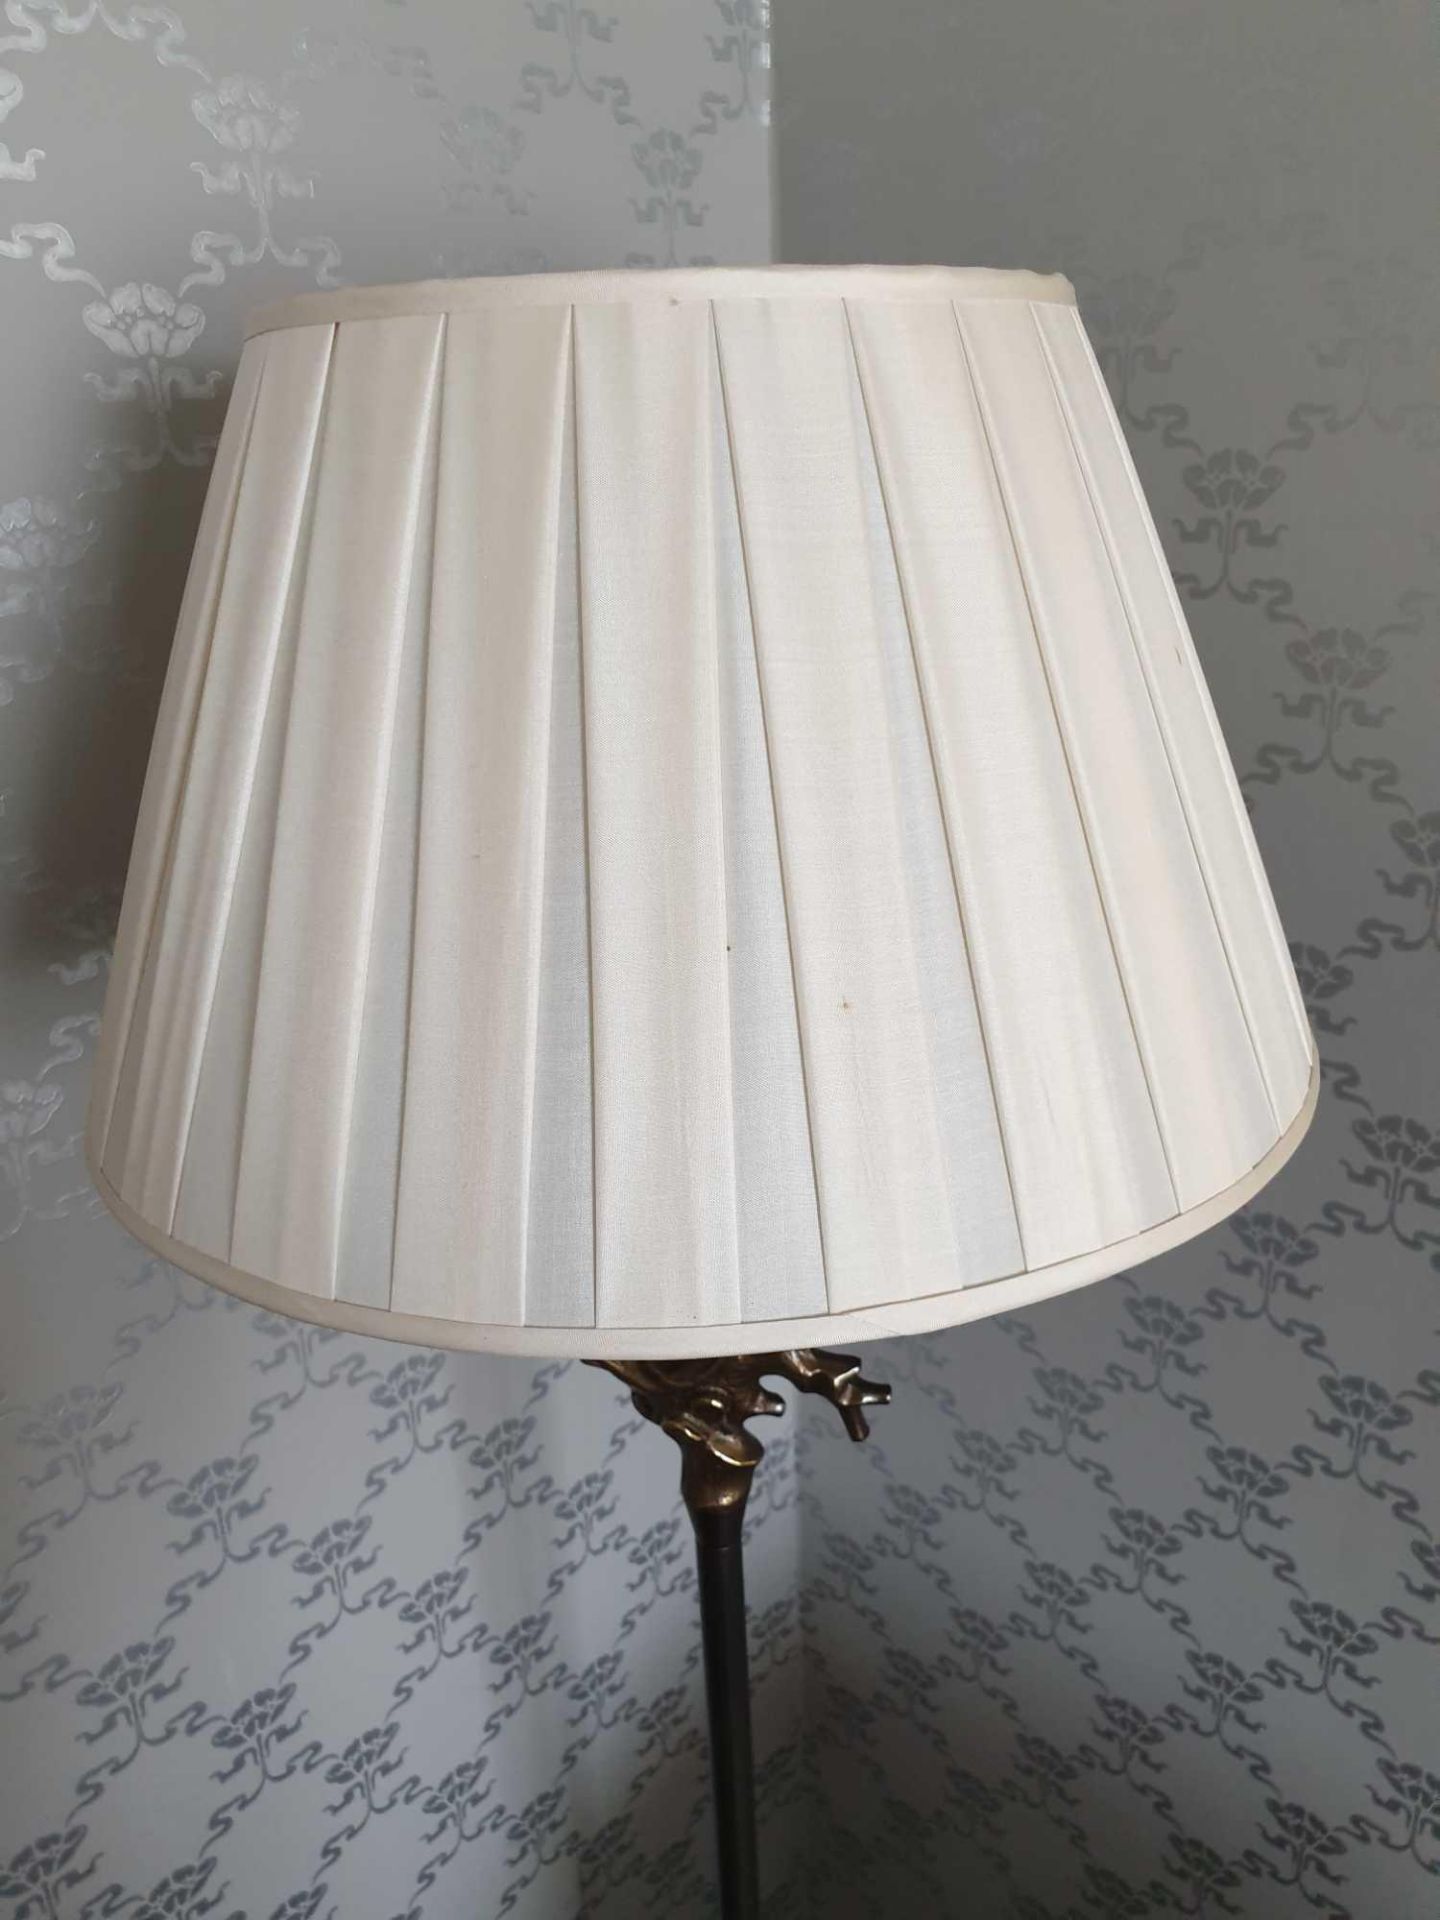 Heathfield And Co Coral Standard Lamp With Linen Shade, 180cms (Room 715) - Image 3 of 3